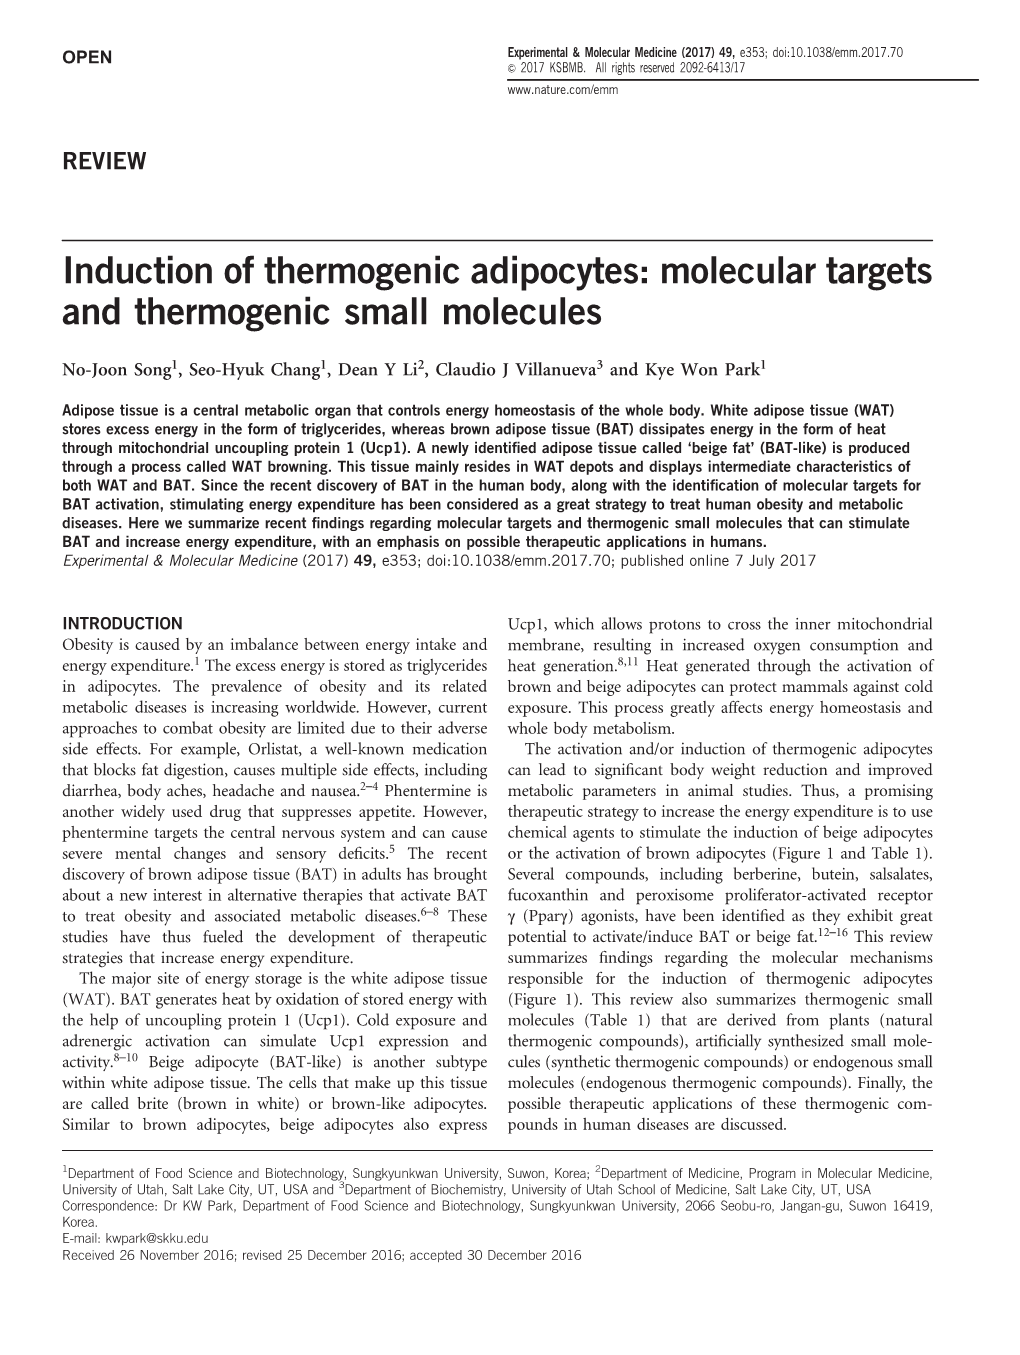 Induction of Thermogenic Adipocytes: Molecular Targets and Thermogenic Small Molecules